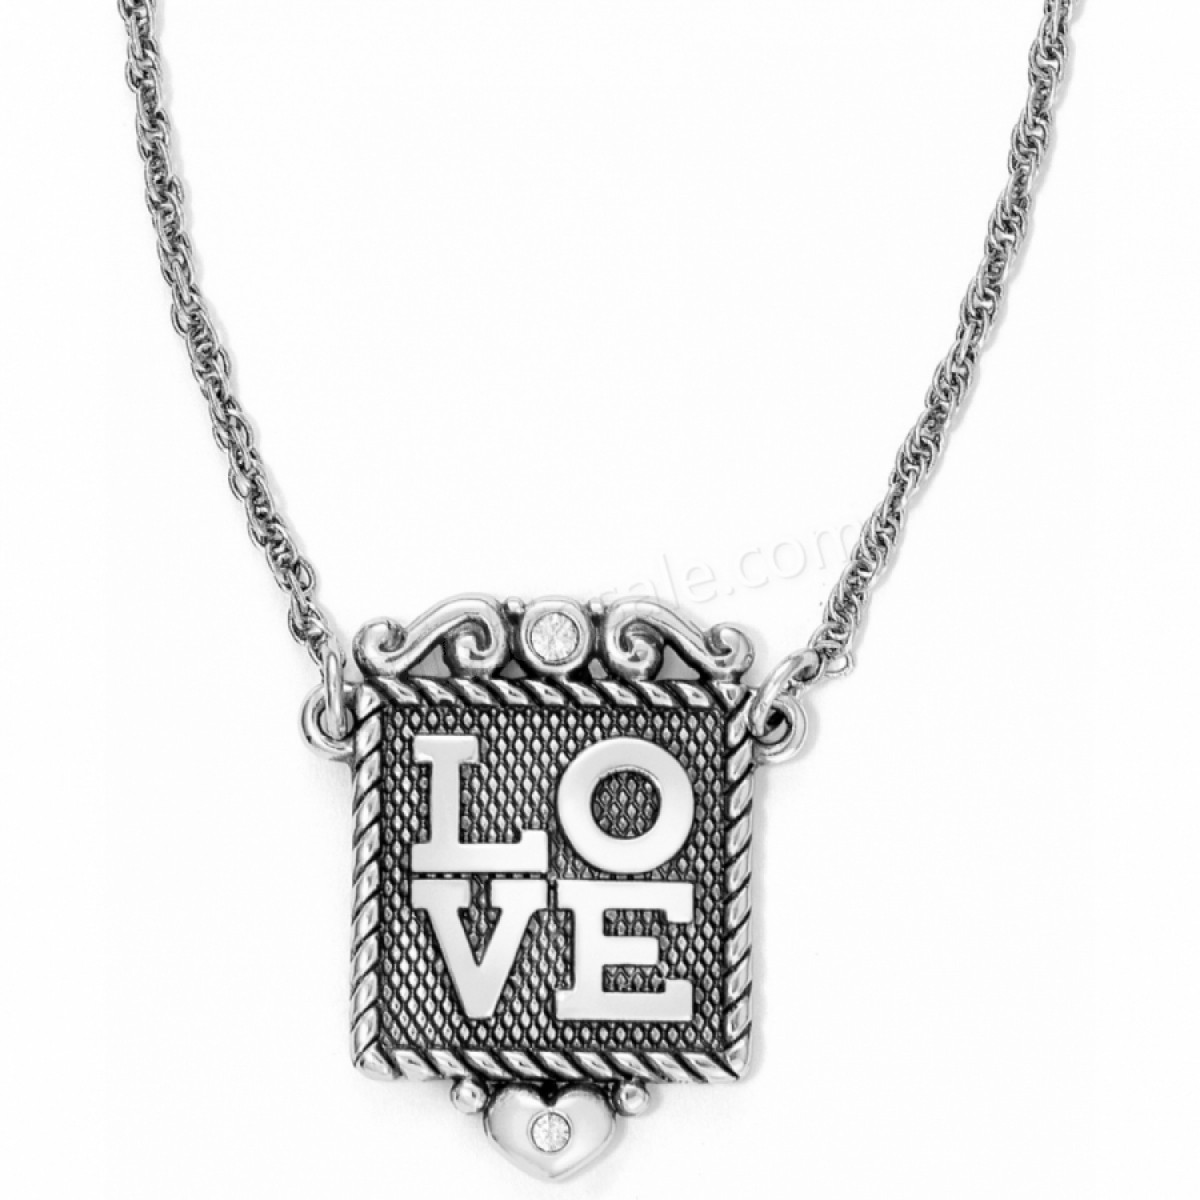 Brighton Collectibles & Online Discount Caf&eacute; Figaro Reversible Convertible Necklace - -0